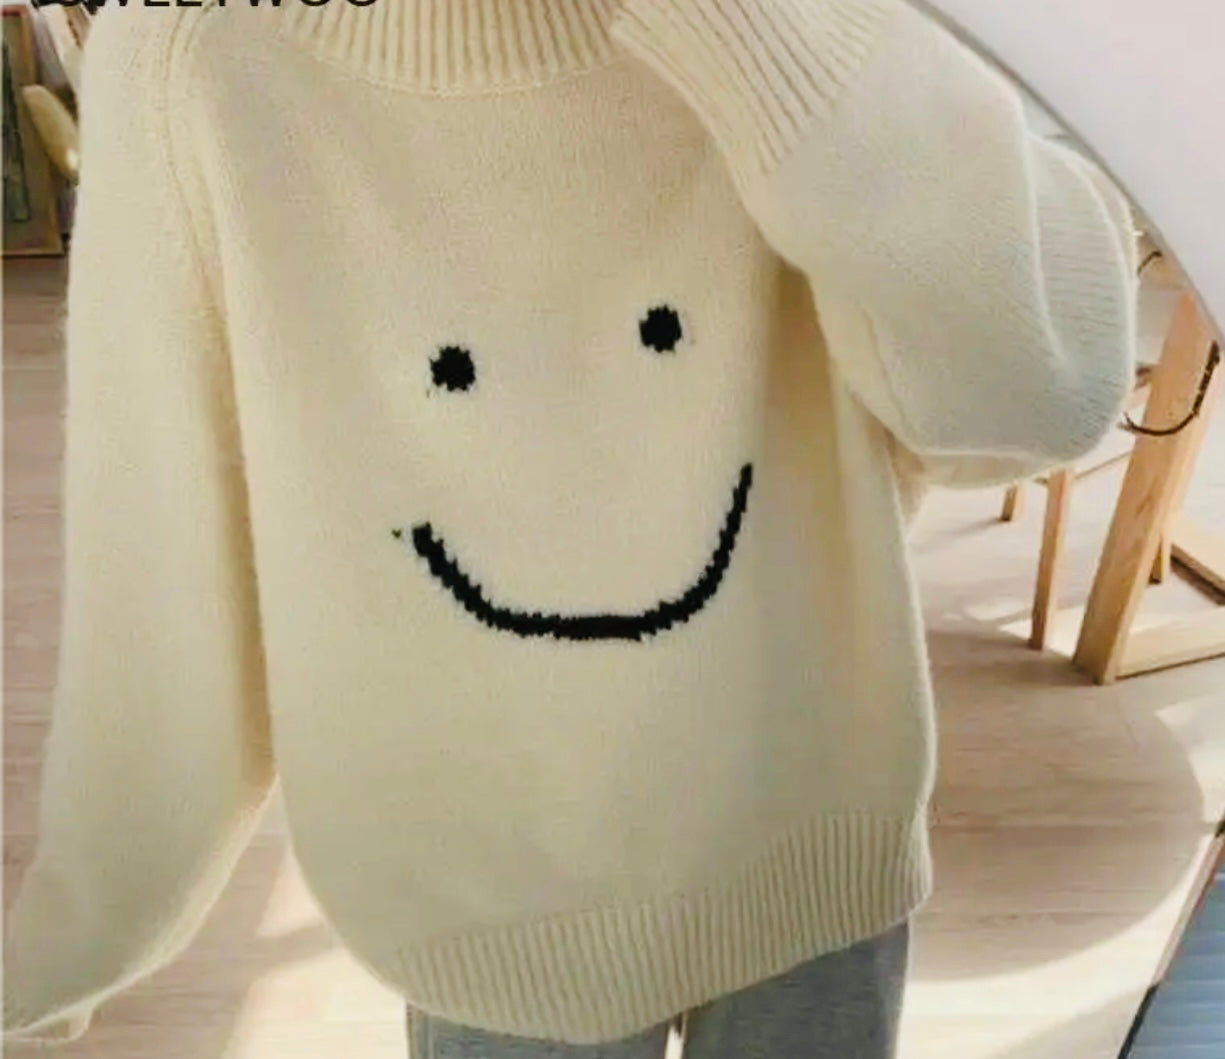 Smiley sweater